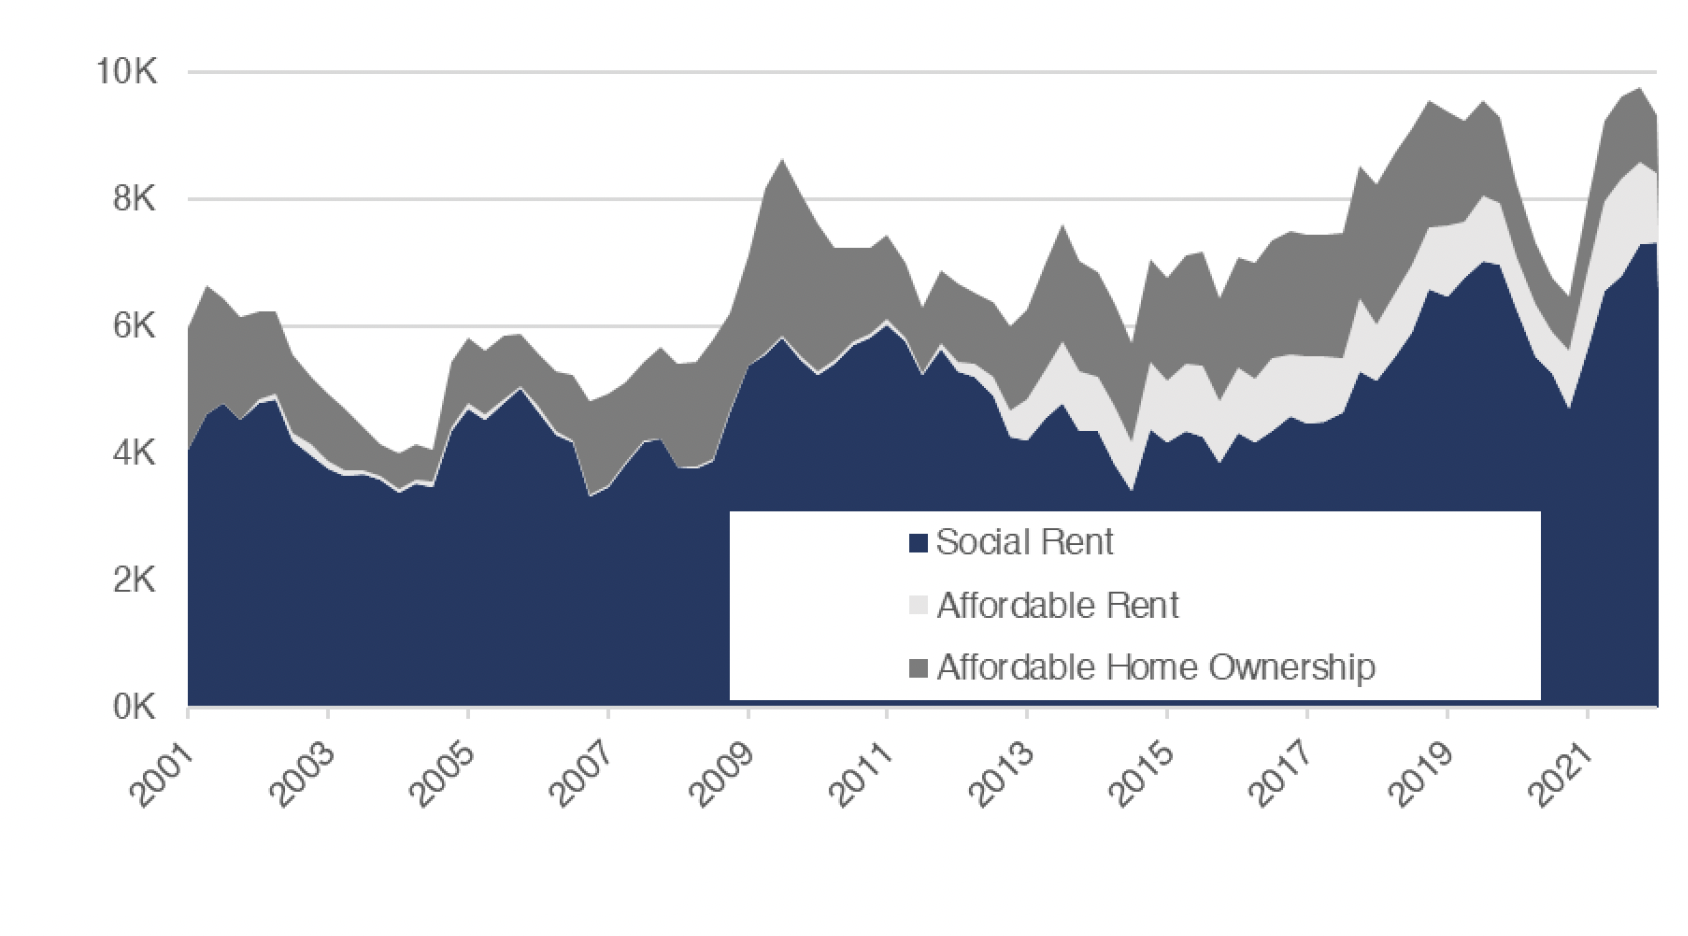 Chart 9.3 demonstrates how affordable housing completions have progressed on a quarterly basis from Q2 2001 to Q2 2022. This is split into affordable housing for social rent, affordable rent and affordable home ownership. 